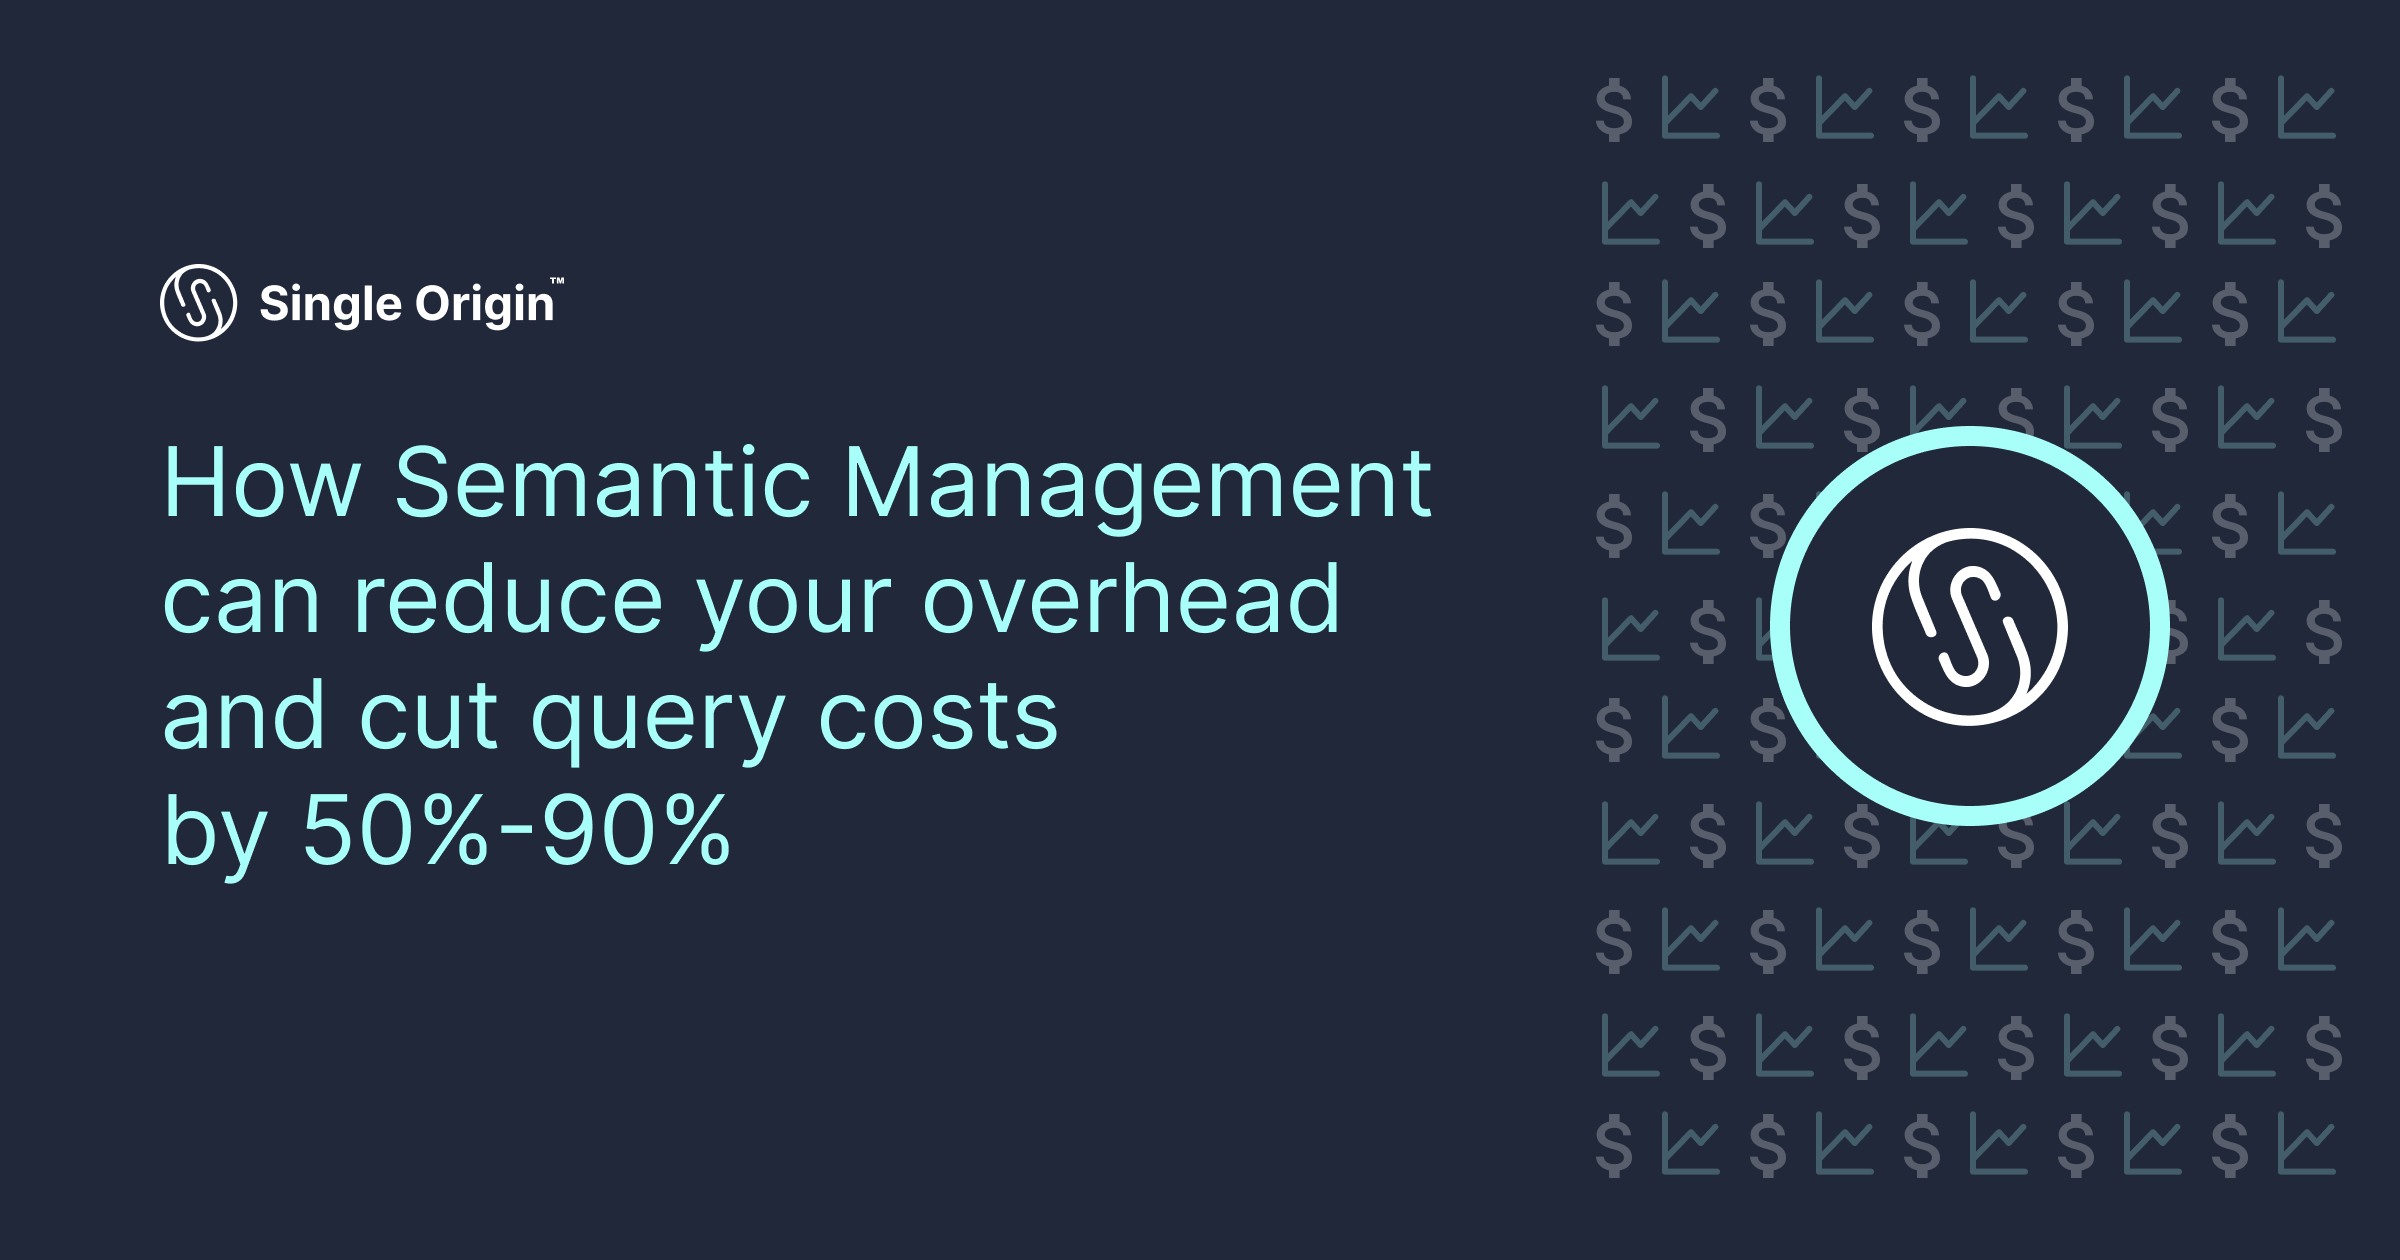 How Semantic Management can reduce your overhead and cut query costs by 50-90%